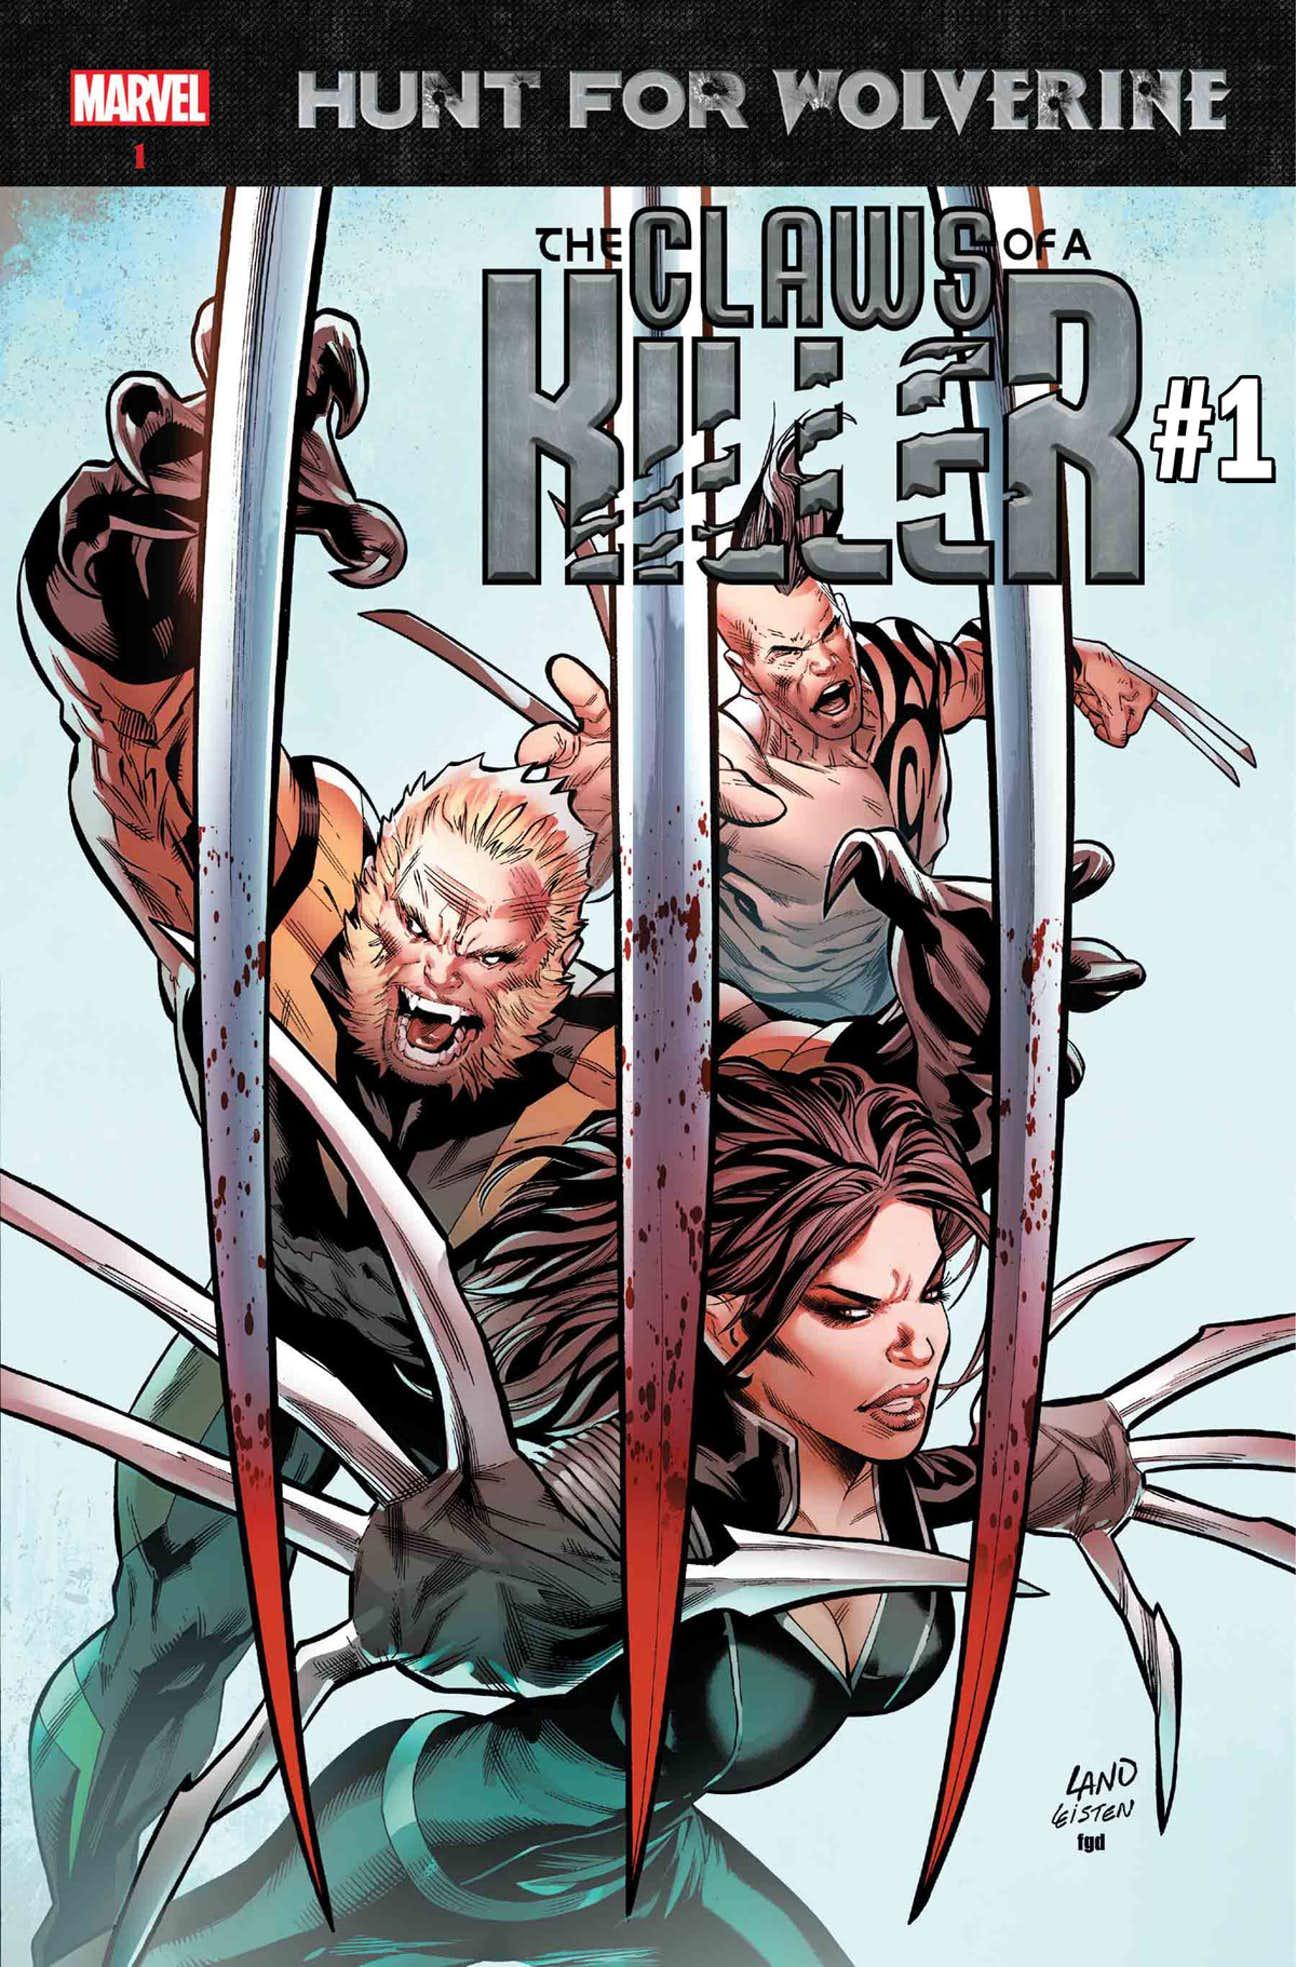 Hunt for Wolverine: The Claws of a Killer Vol. 1 #1